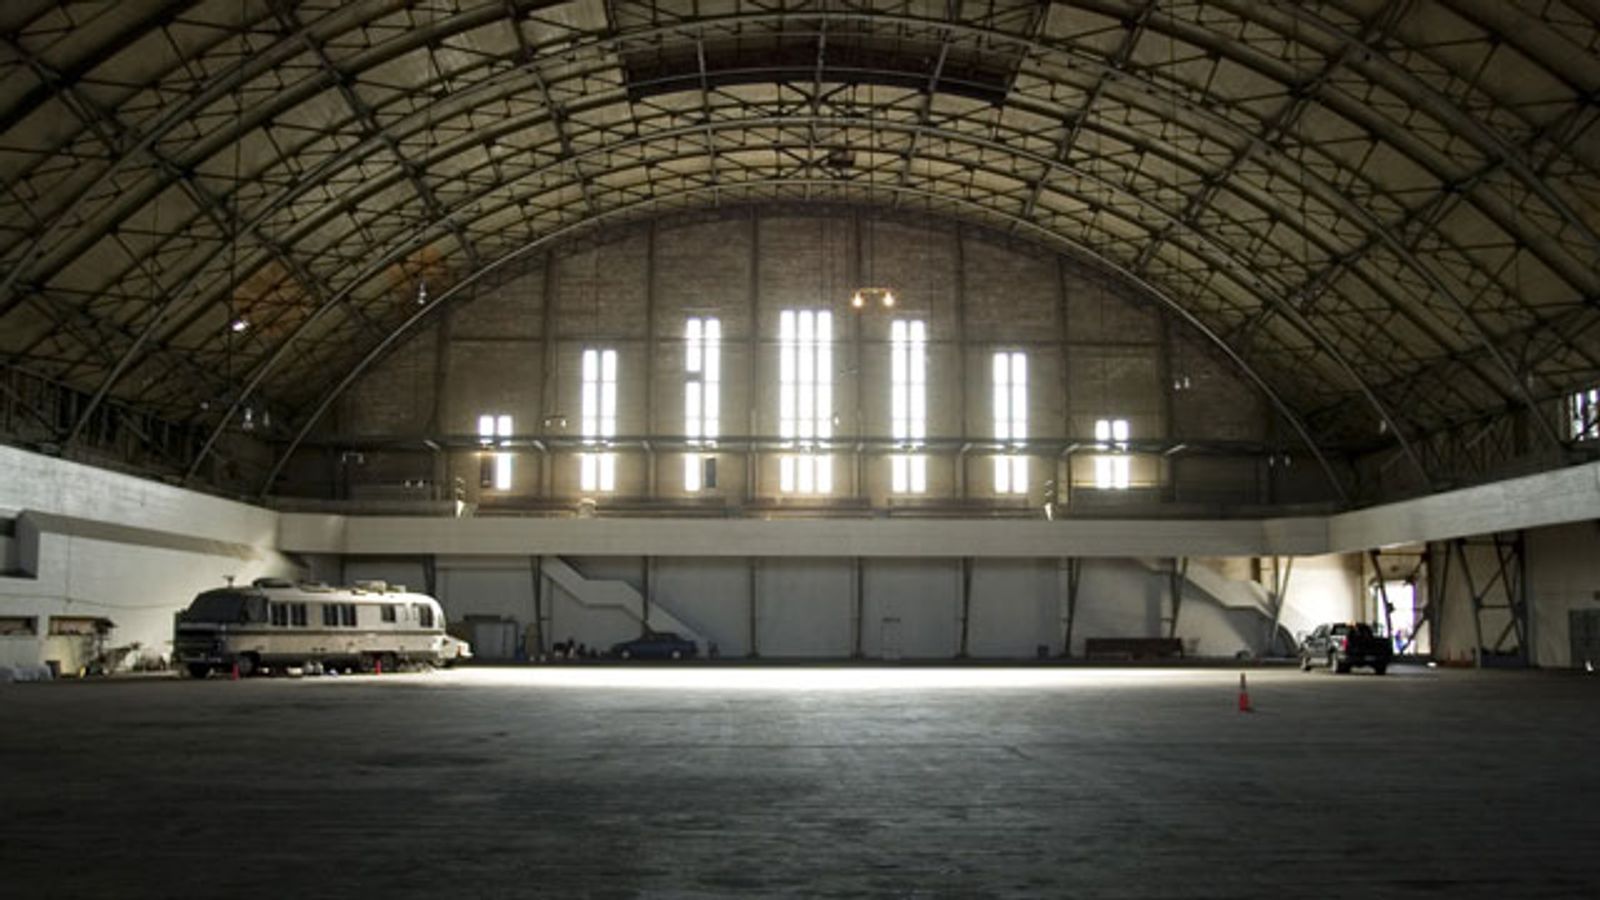 Kink Fights Plans to Construct Building Adjacent to Armory